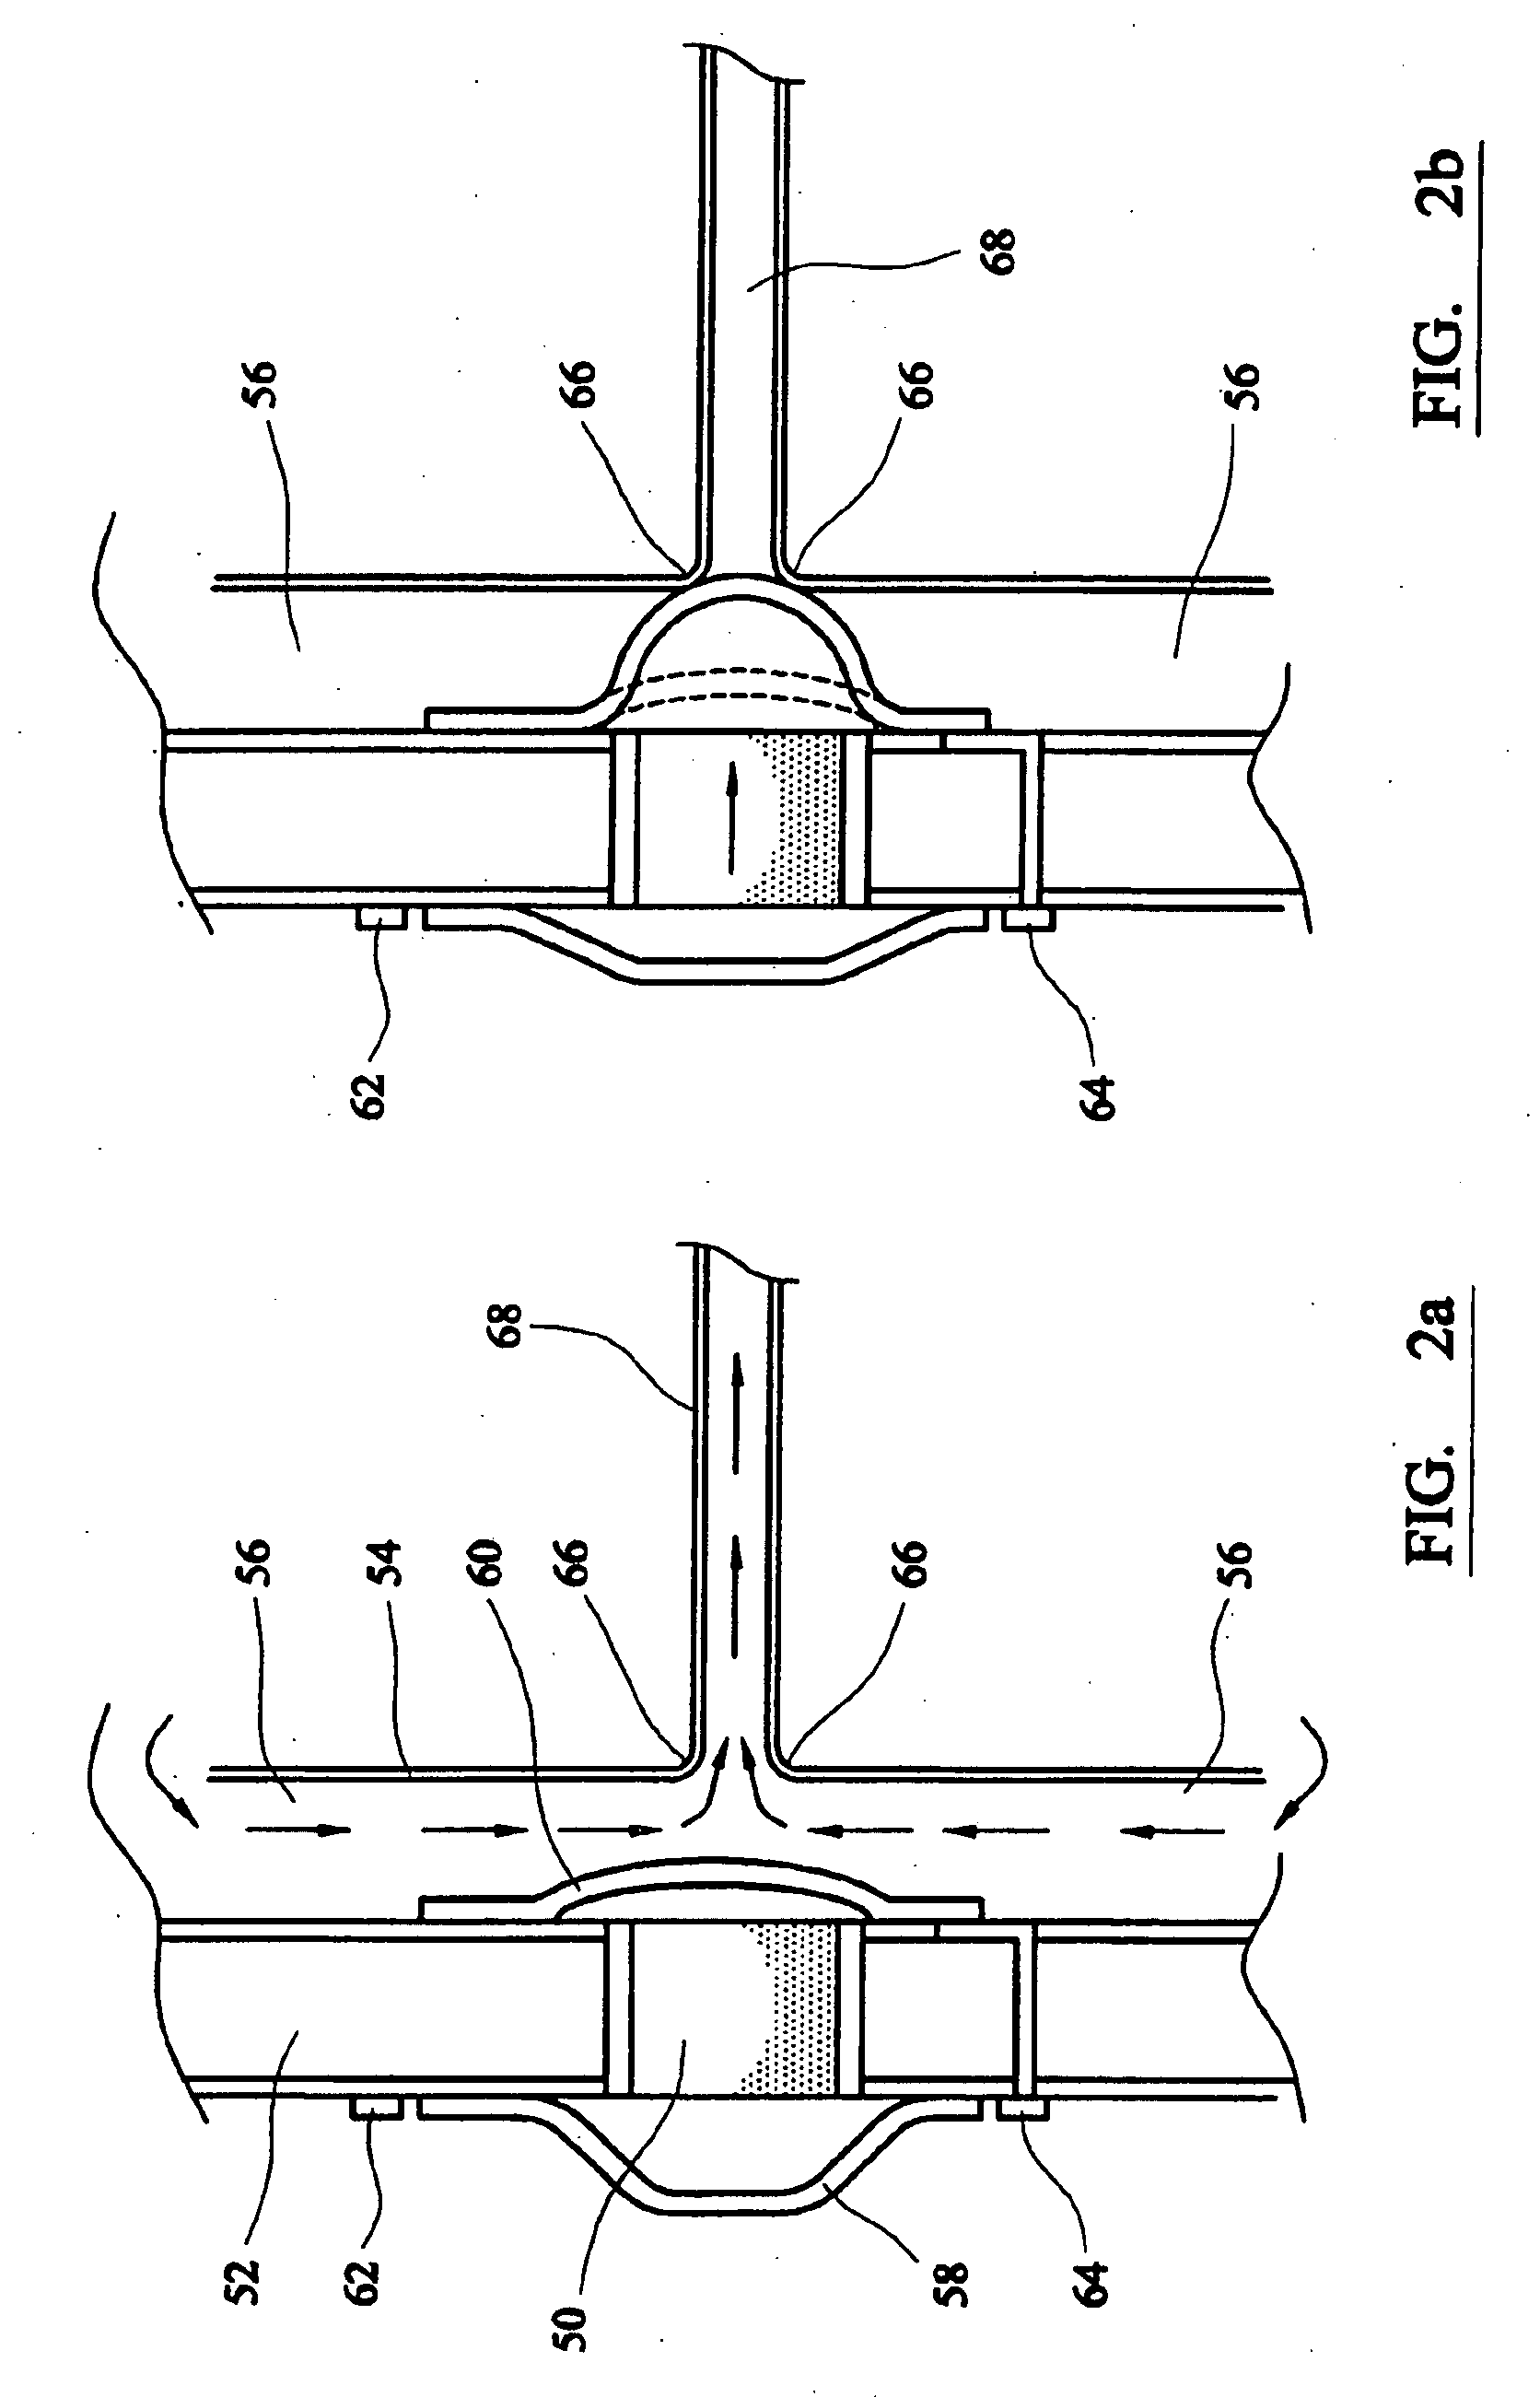 Valve for controlling flow of a fluid